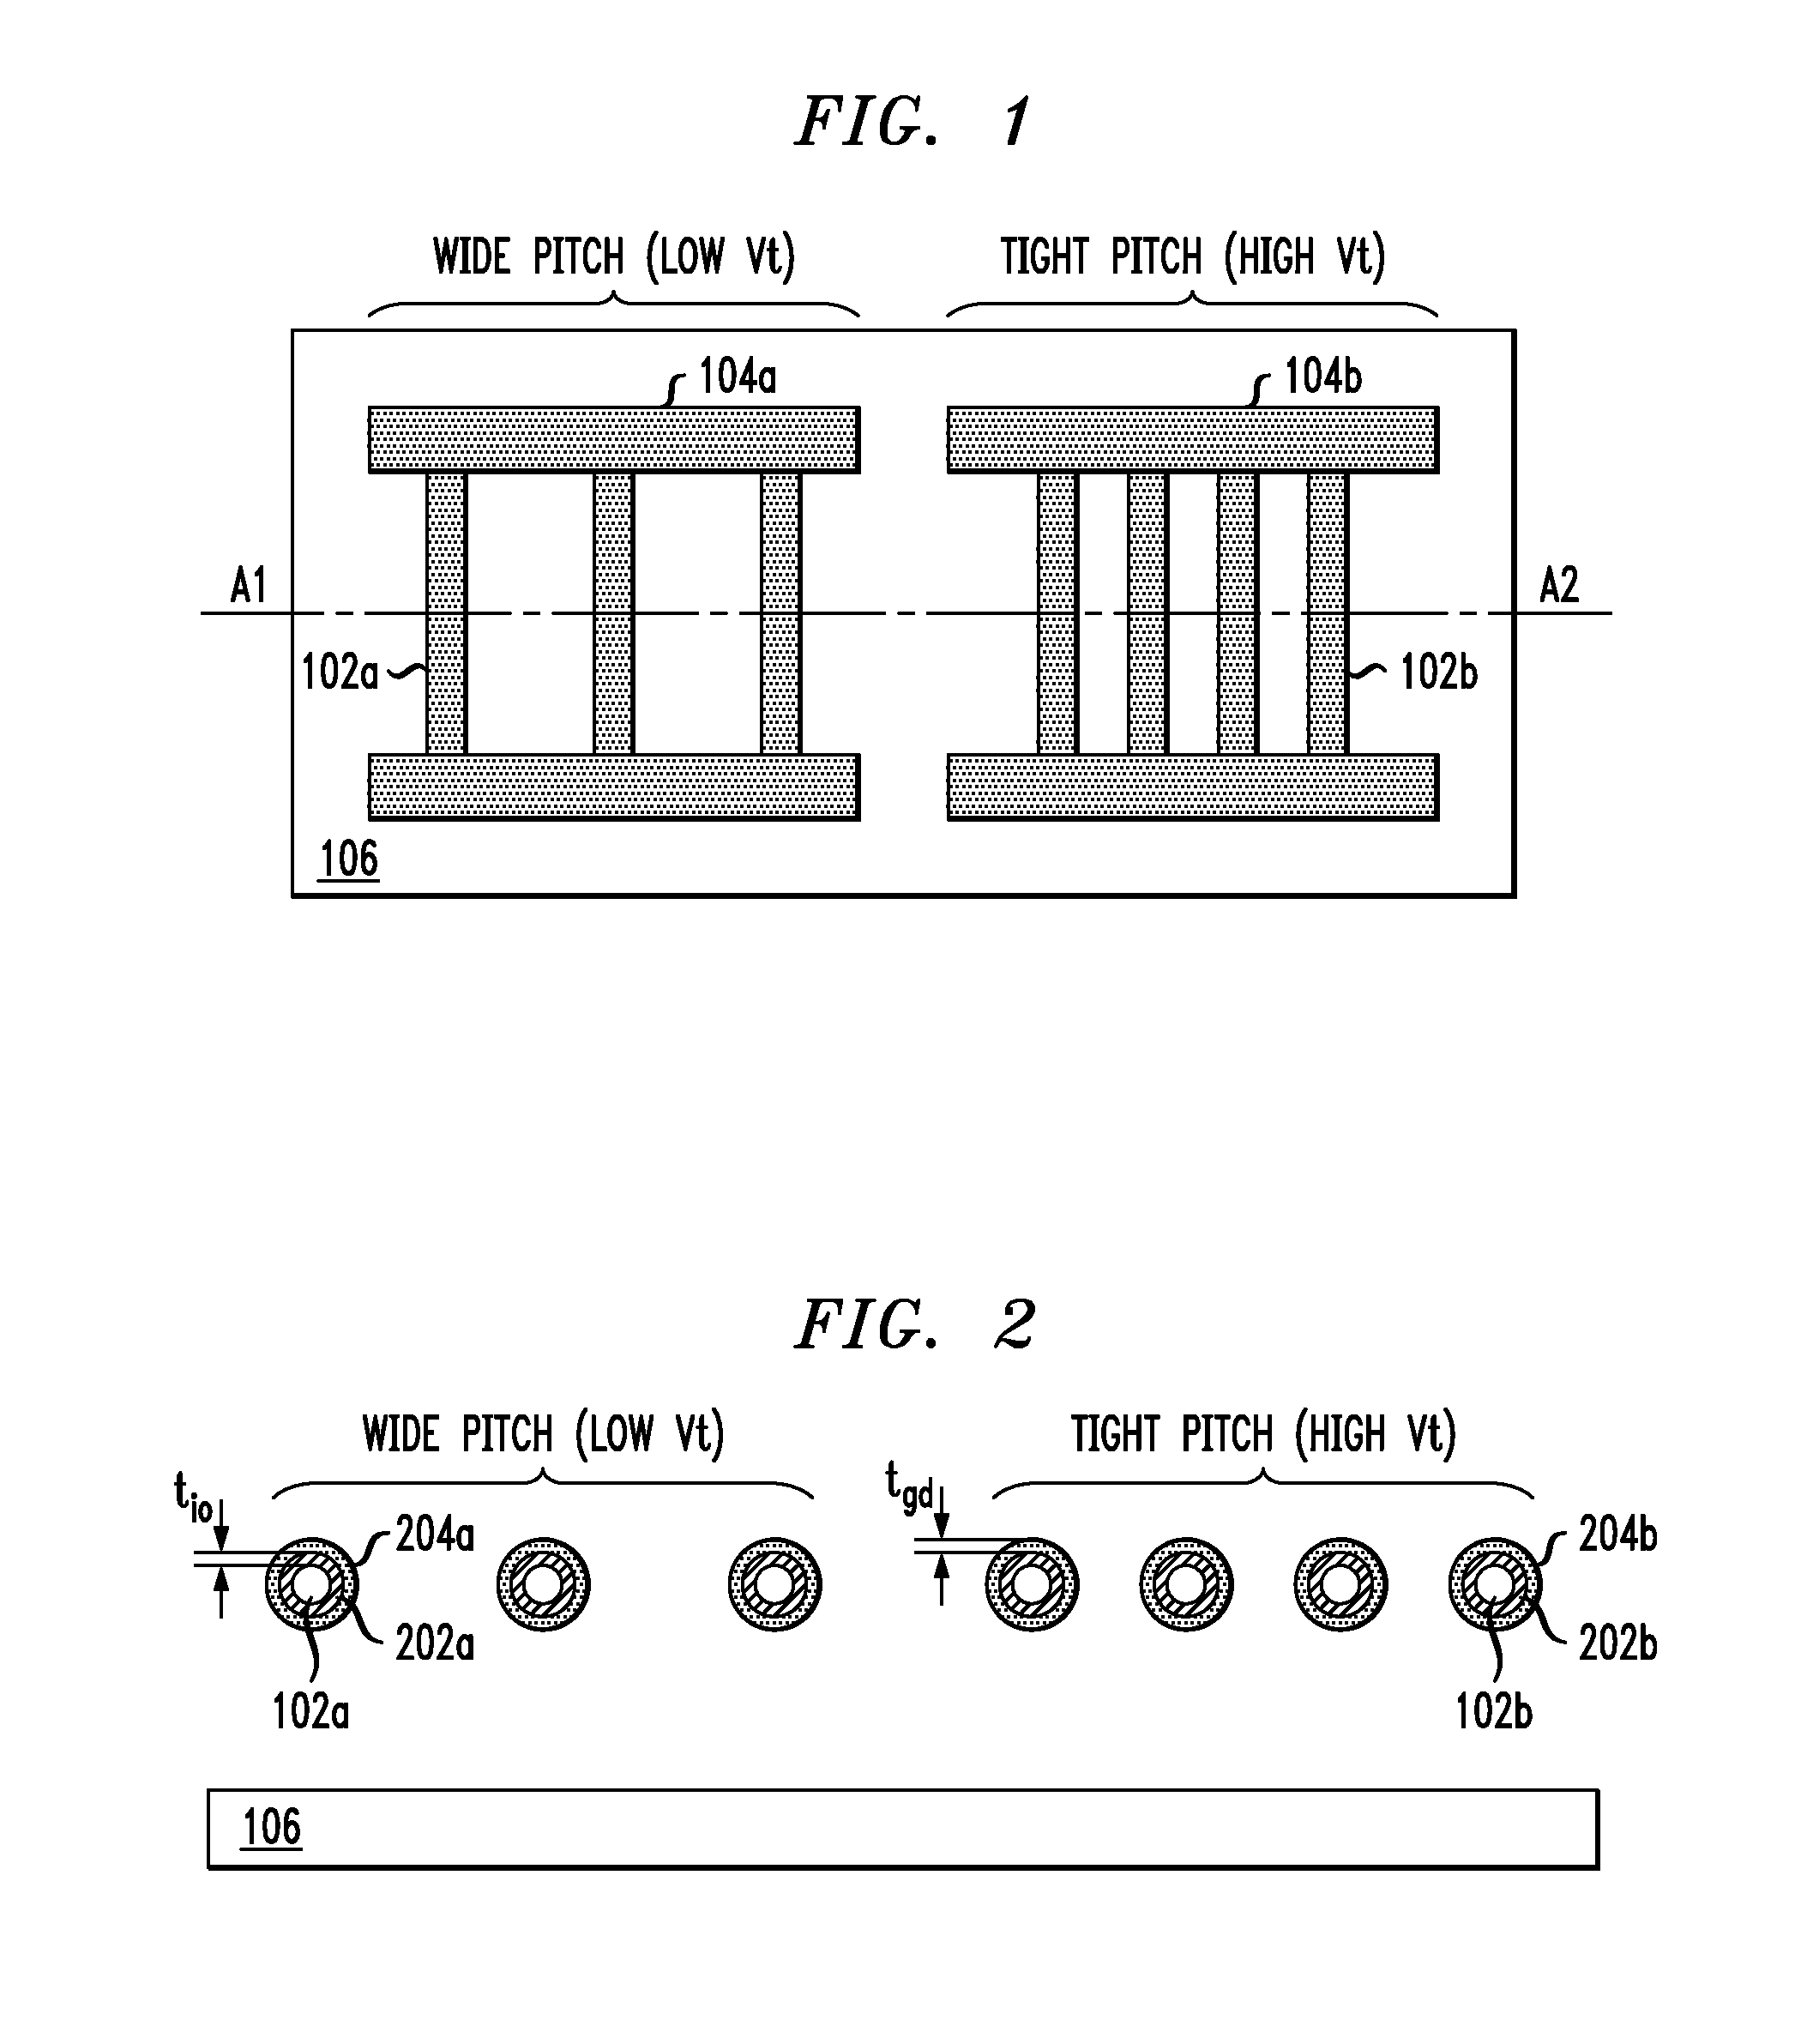 Techniques for metal gate work function engineering to enable multiple threshold voltage nanowire FET devices